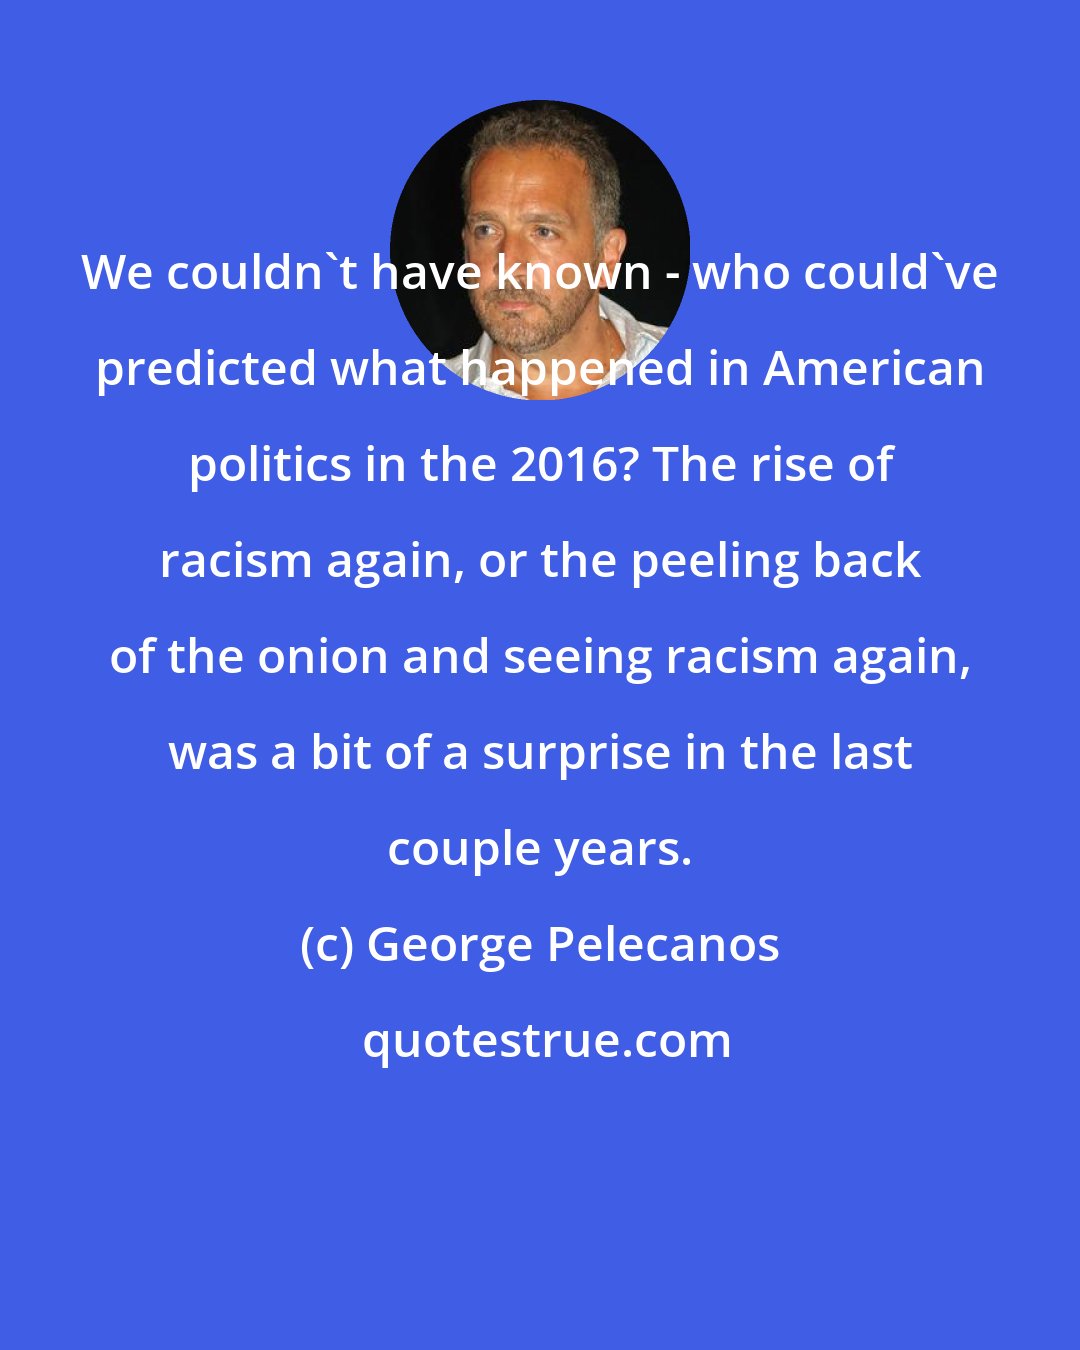 George Pelecanos: We couldn't have known - who could've predicted what happened in American politics in the 2016? The rise of racism again, or the peeling back of the onion and seeing racism again, was a bit of a surprise in the last couple years.